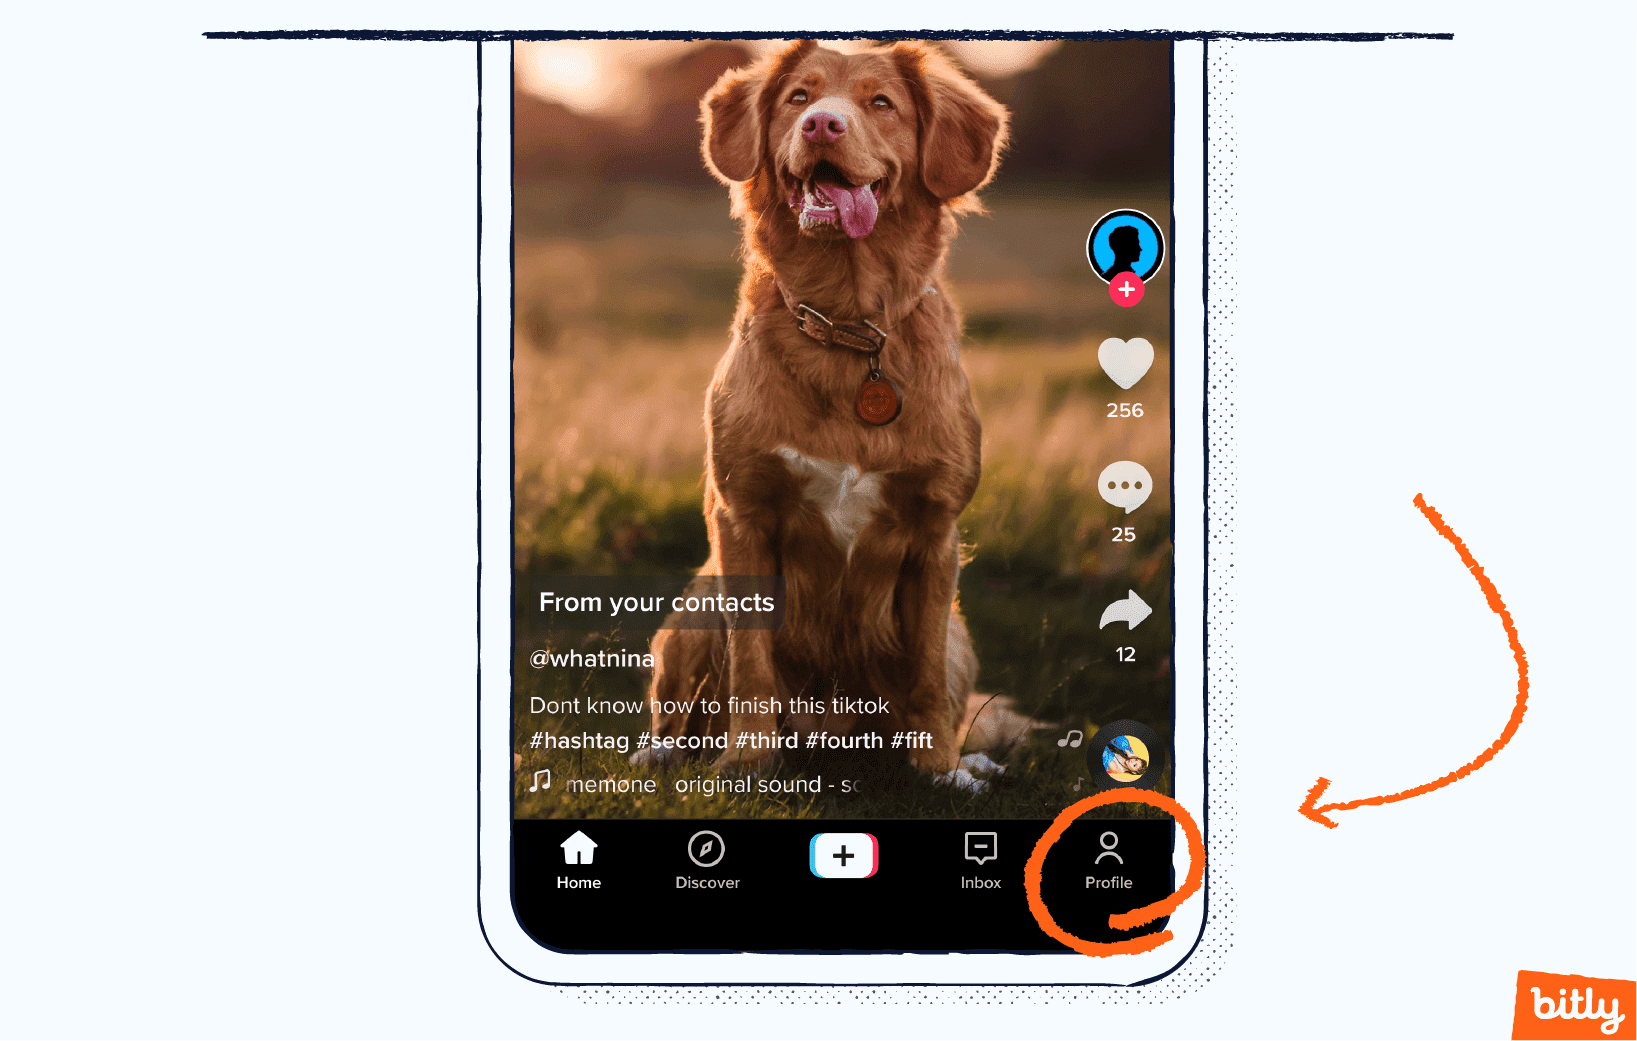 A dog on the home page of a TikTok account with an orange arrow pointing at the profile icon.